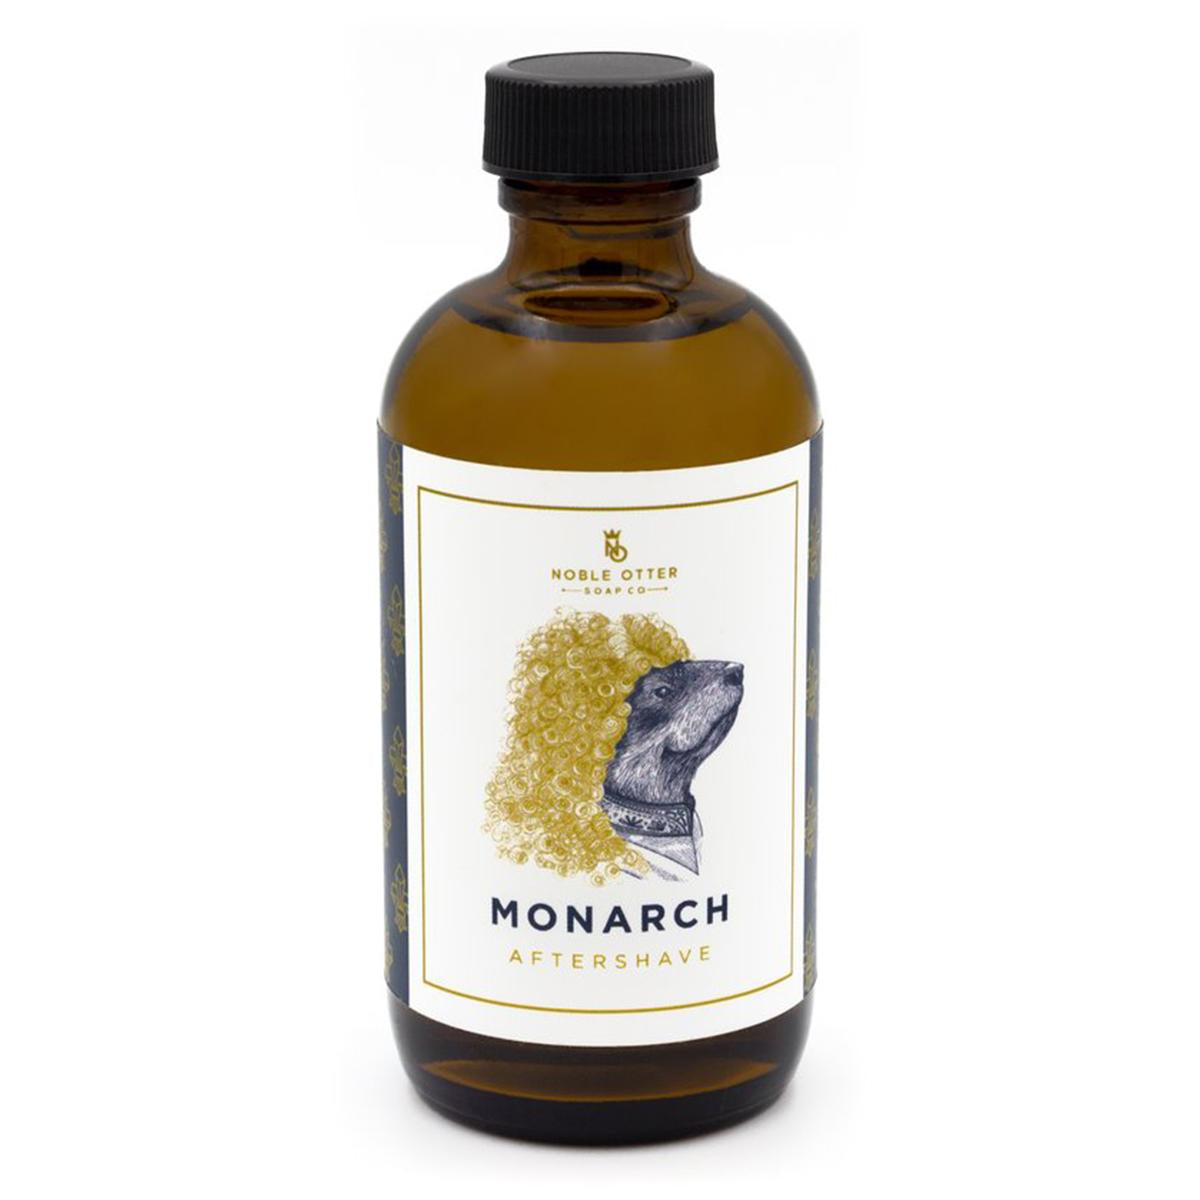 Primary image of Monarch Aftershave